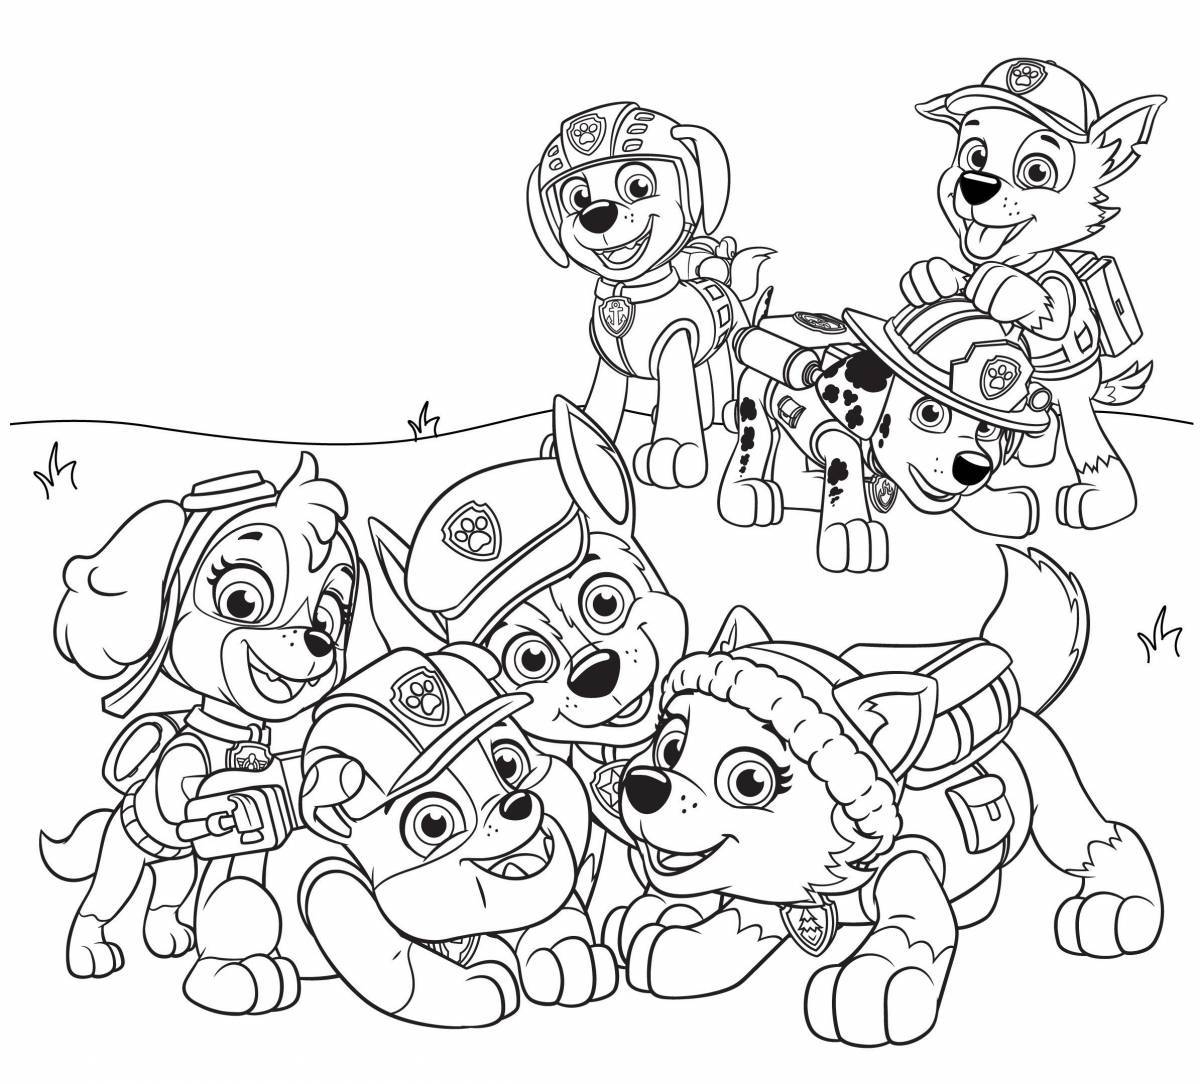 Paw Patrol bright coloring for girls